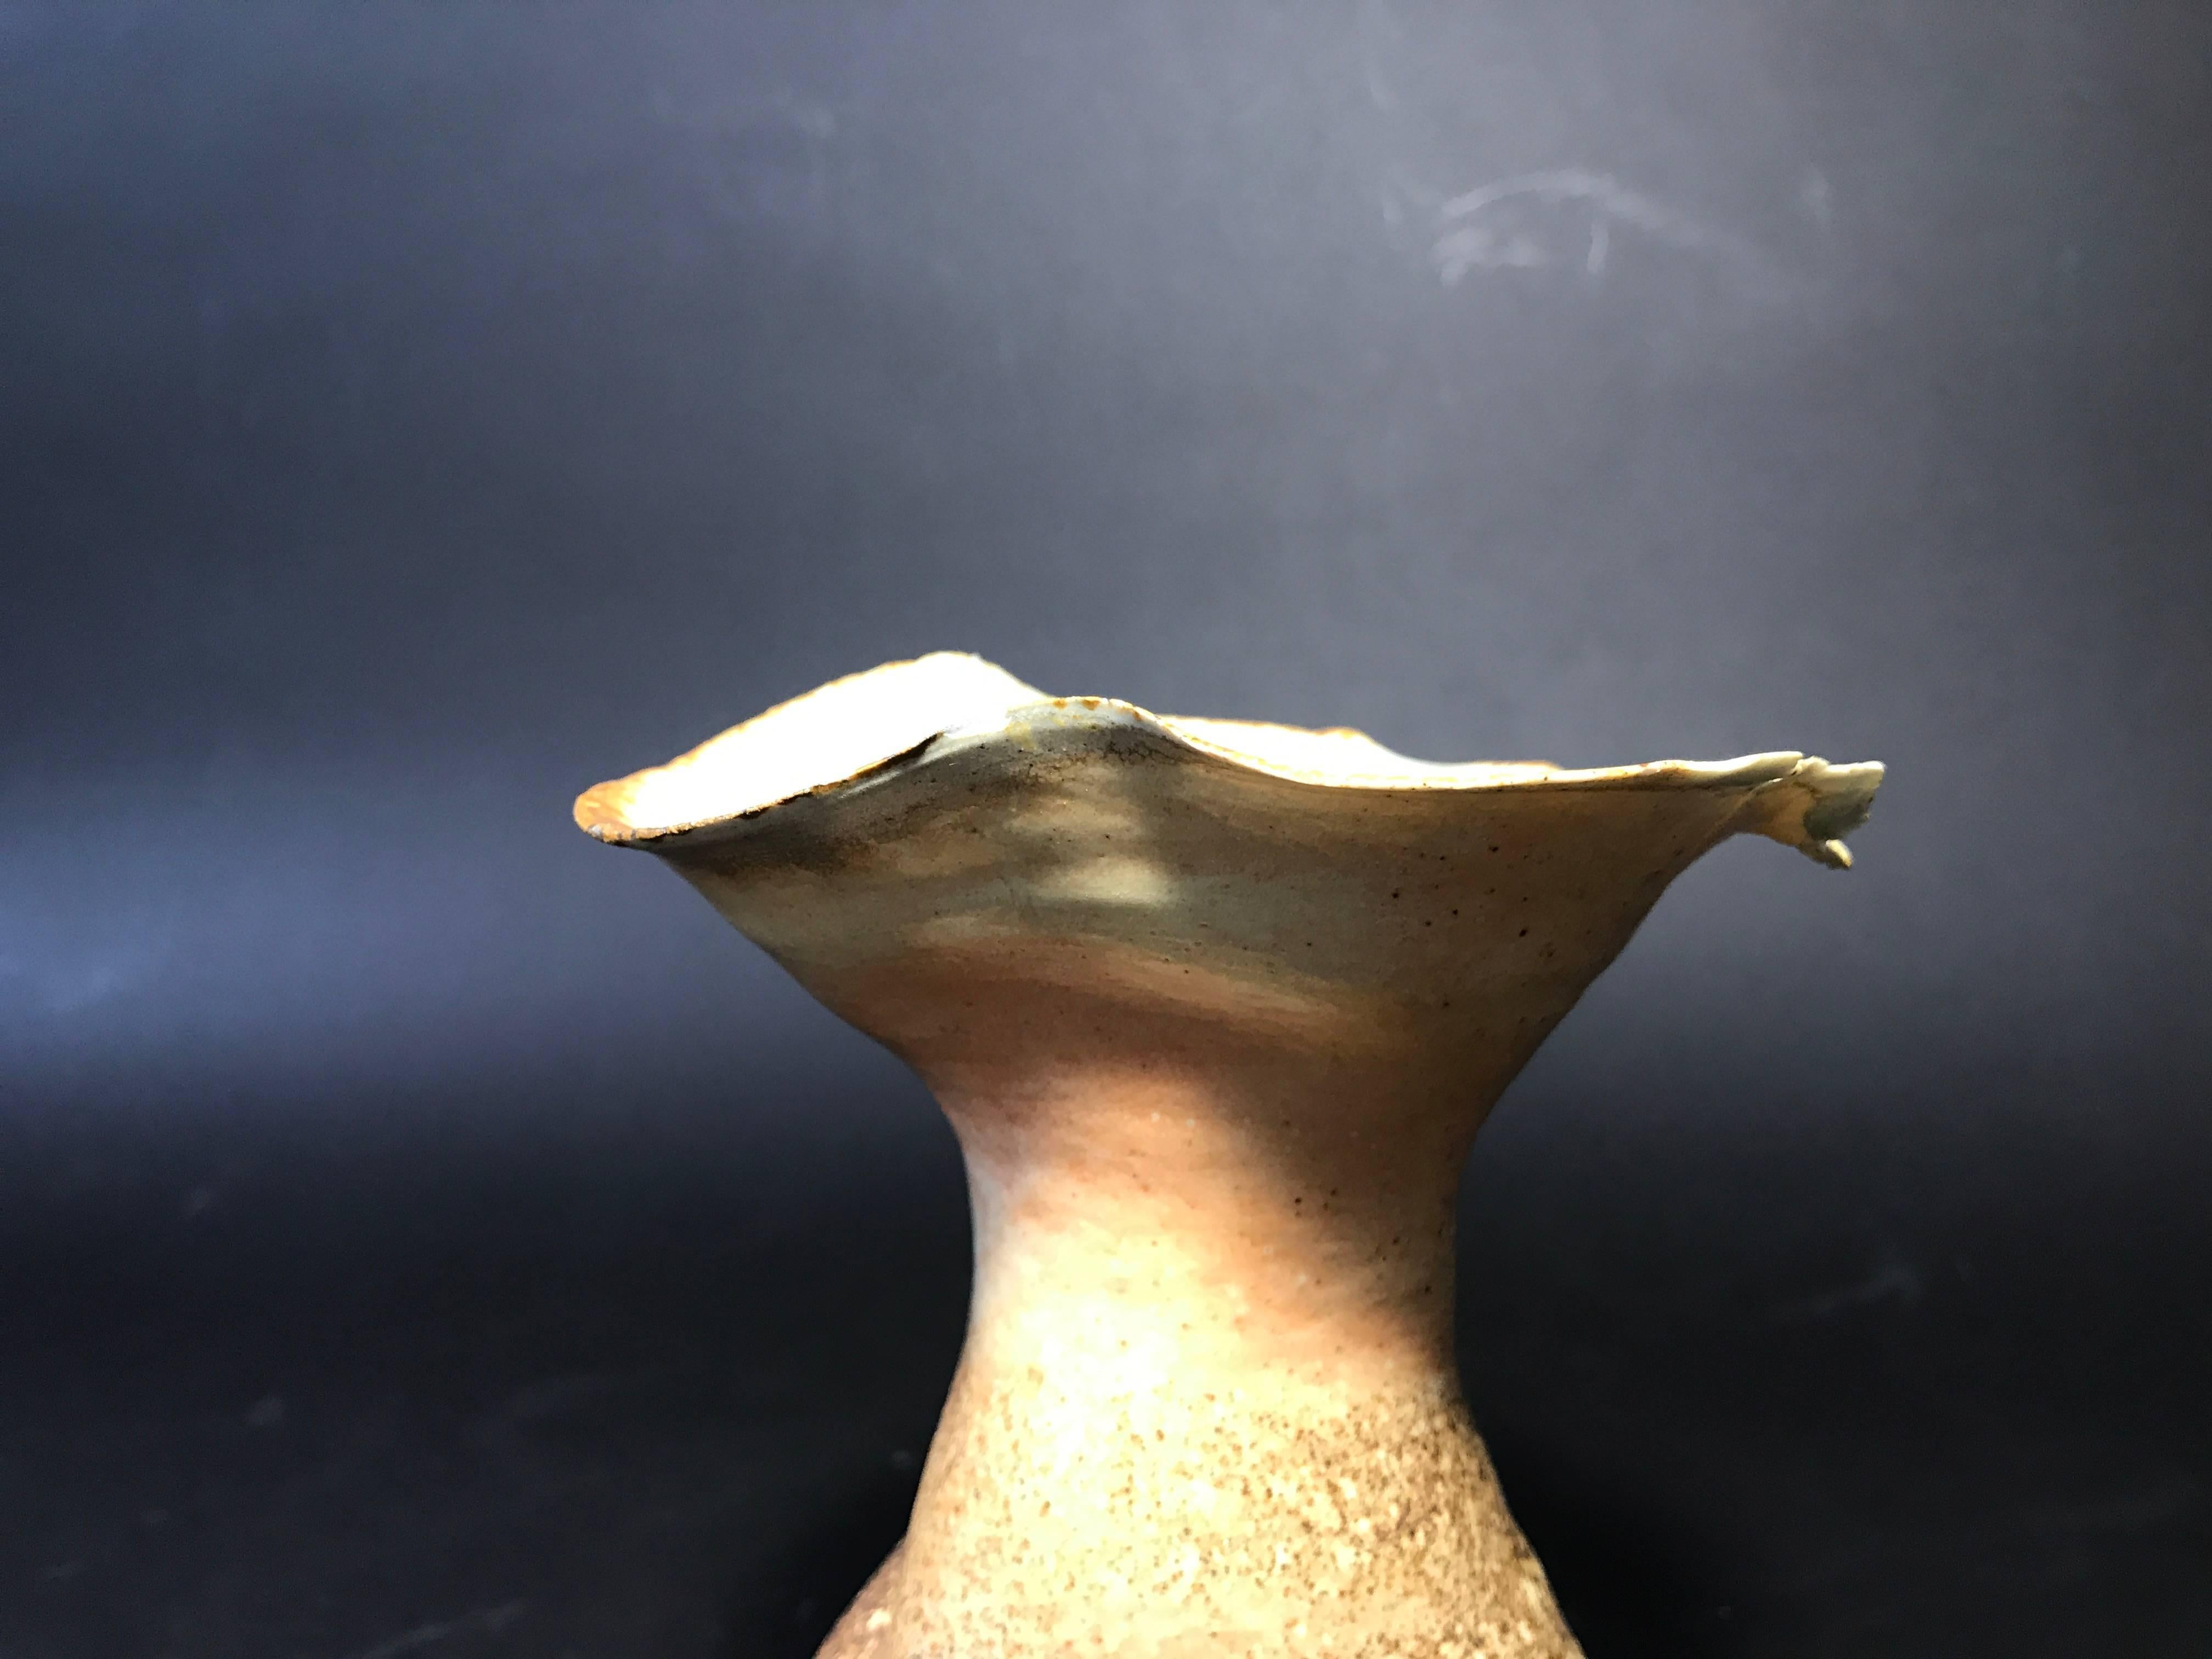 For your consideration is a handmade ceramic vessel by Mary Roehm. In very good condition

Dimensions are height 7.75' x diameter 5.75'

Mary Roehm is known for her paper thin wheel-thrown porcelain vessels. She explores the possibilities for